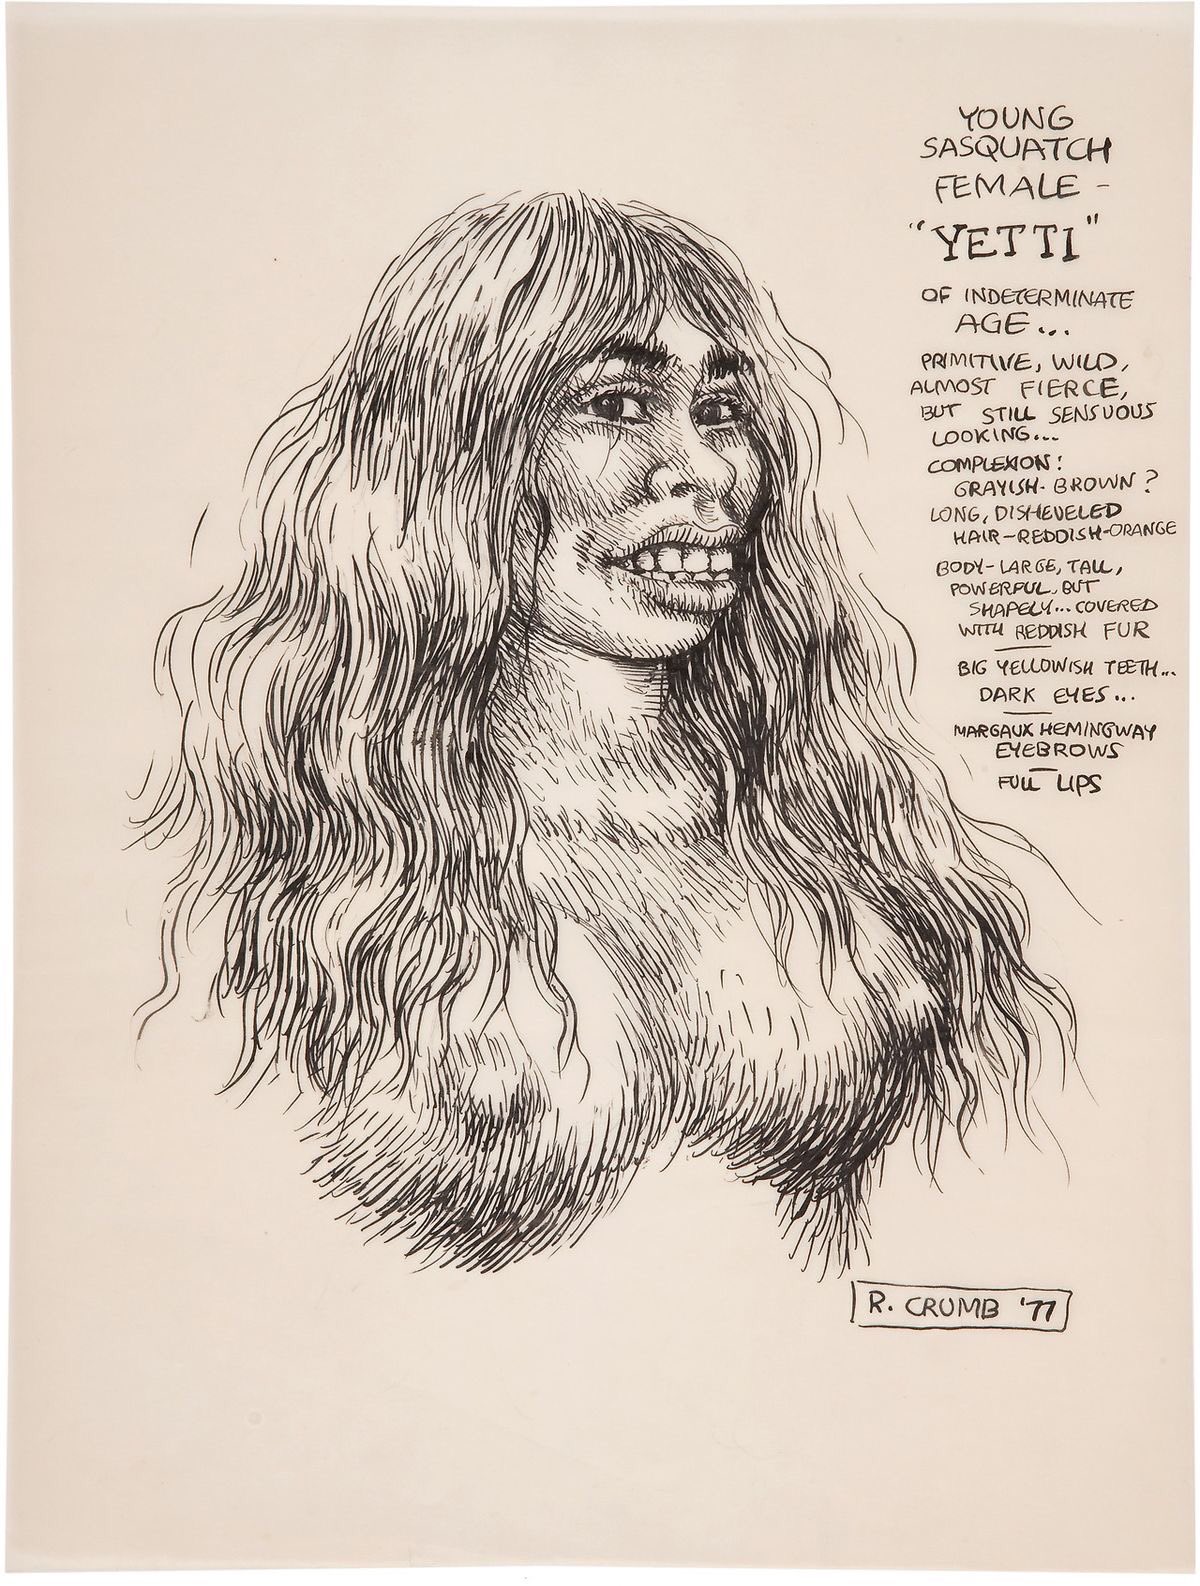 “In the late 1970s, Robert Crumb briefly worked on a film version of his 19...